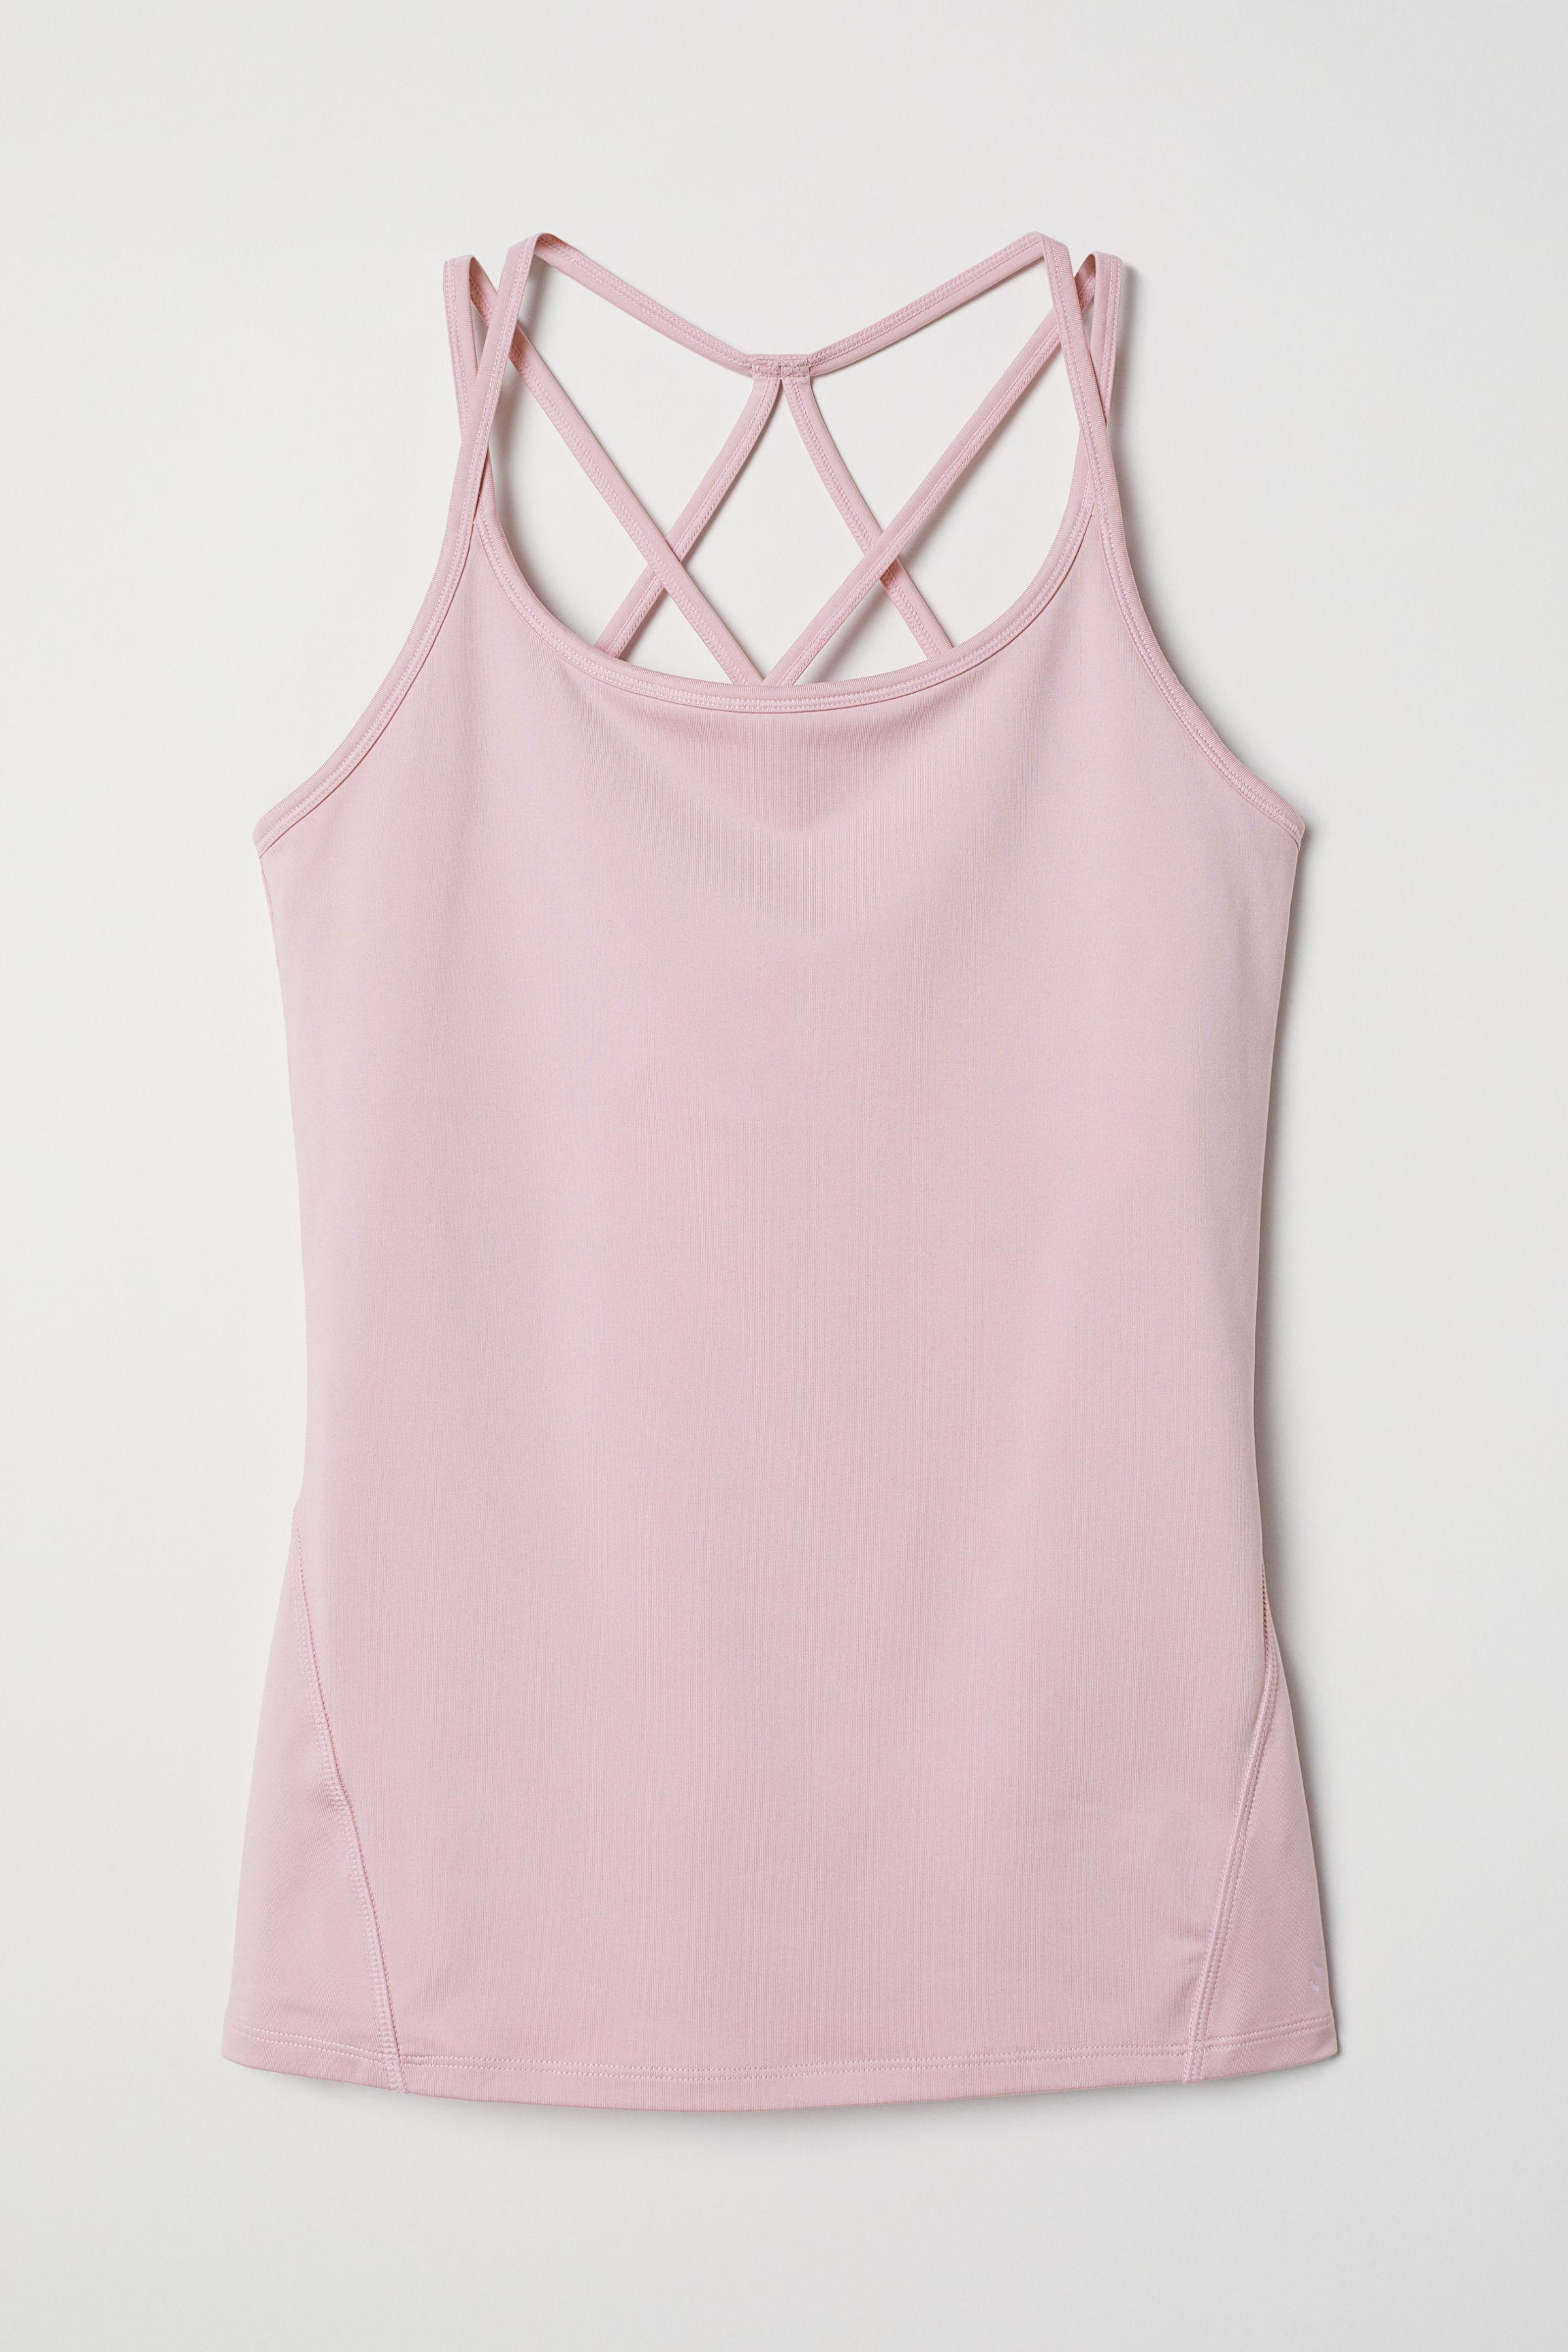 Handm Synthetic Sports Tank Top With Bra In Light Pink Pink Lyst 